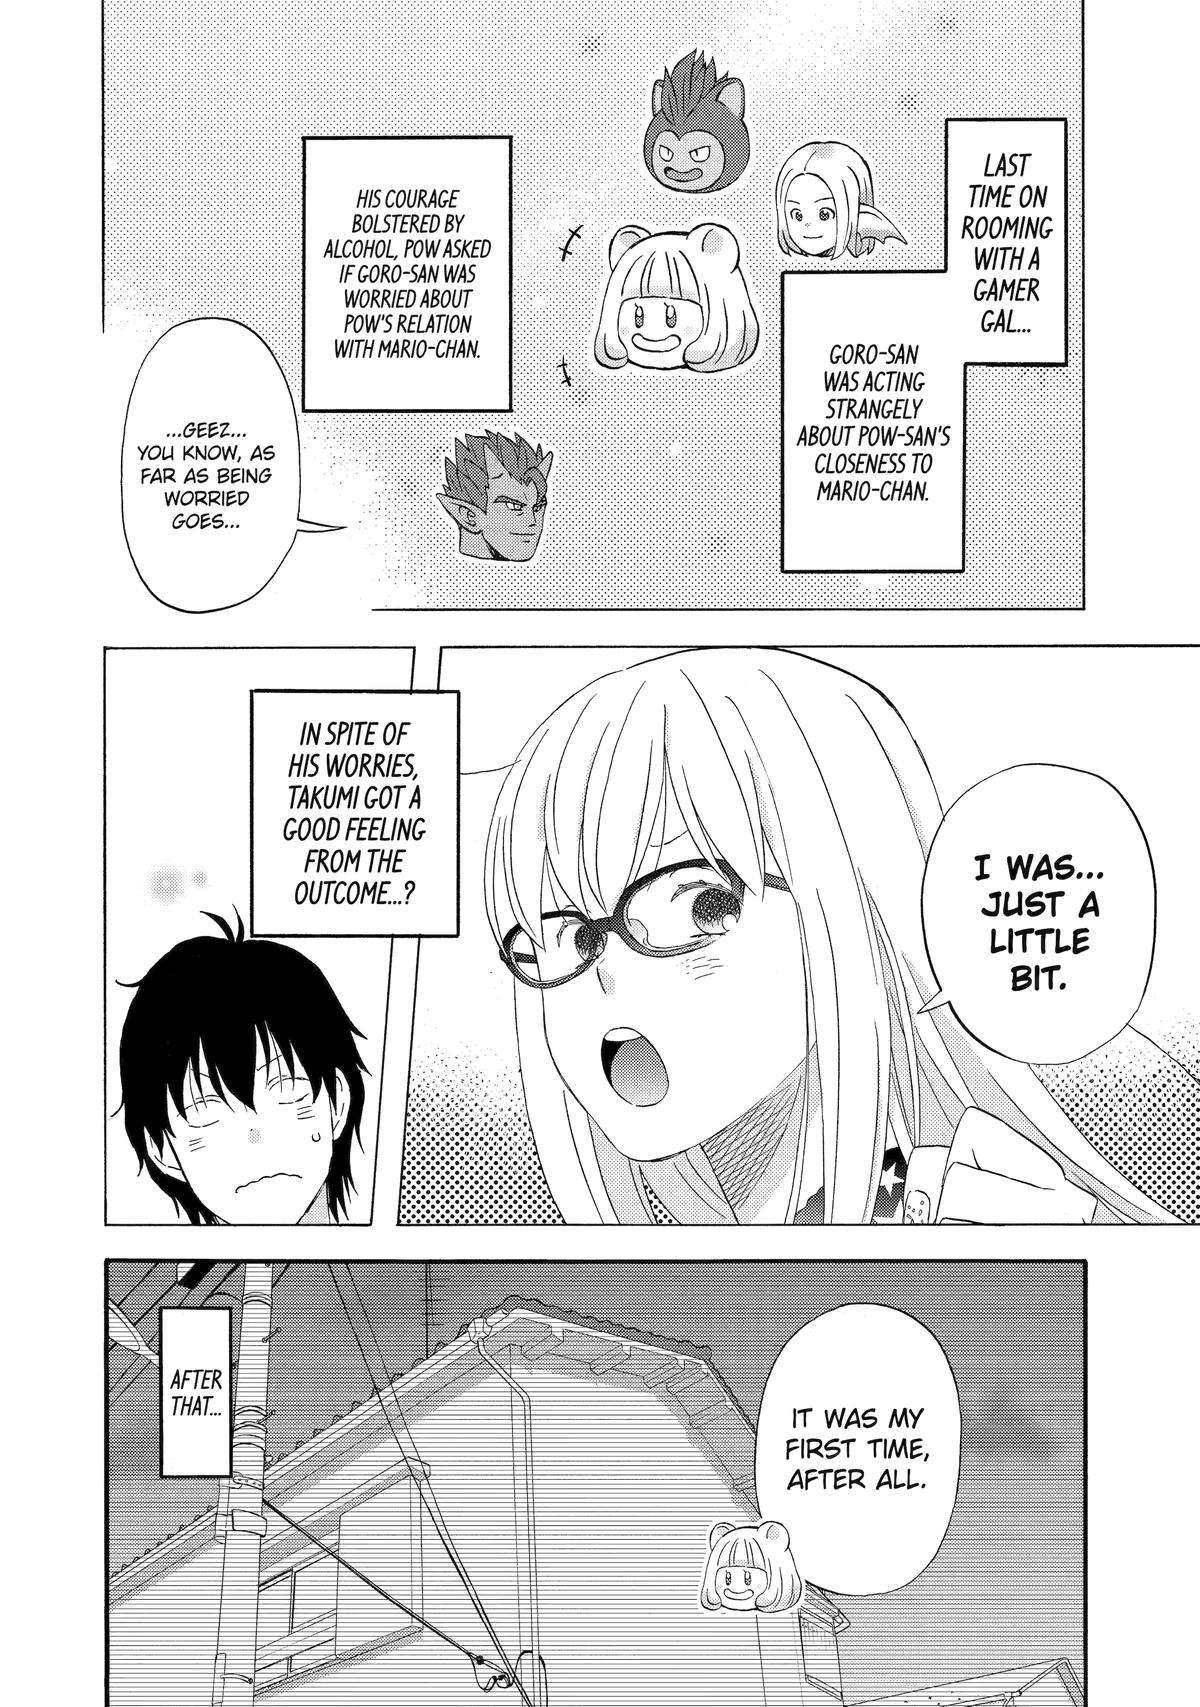 Rooming with a Gamer Gal - chapter 13 - #2